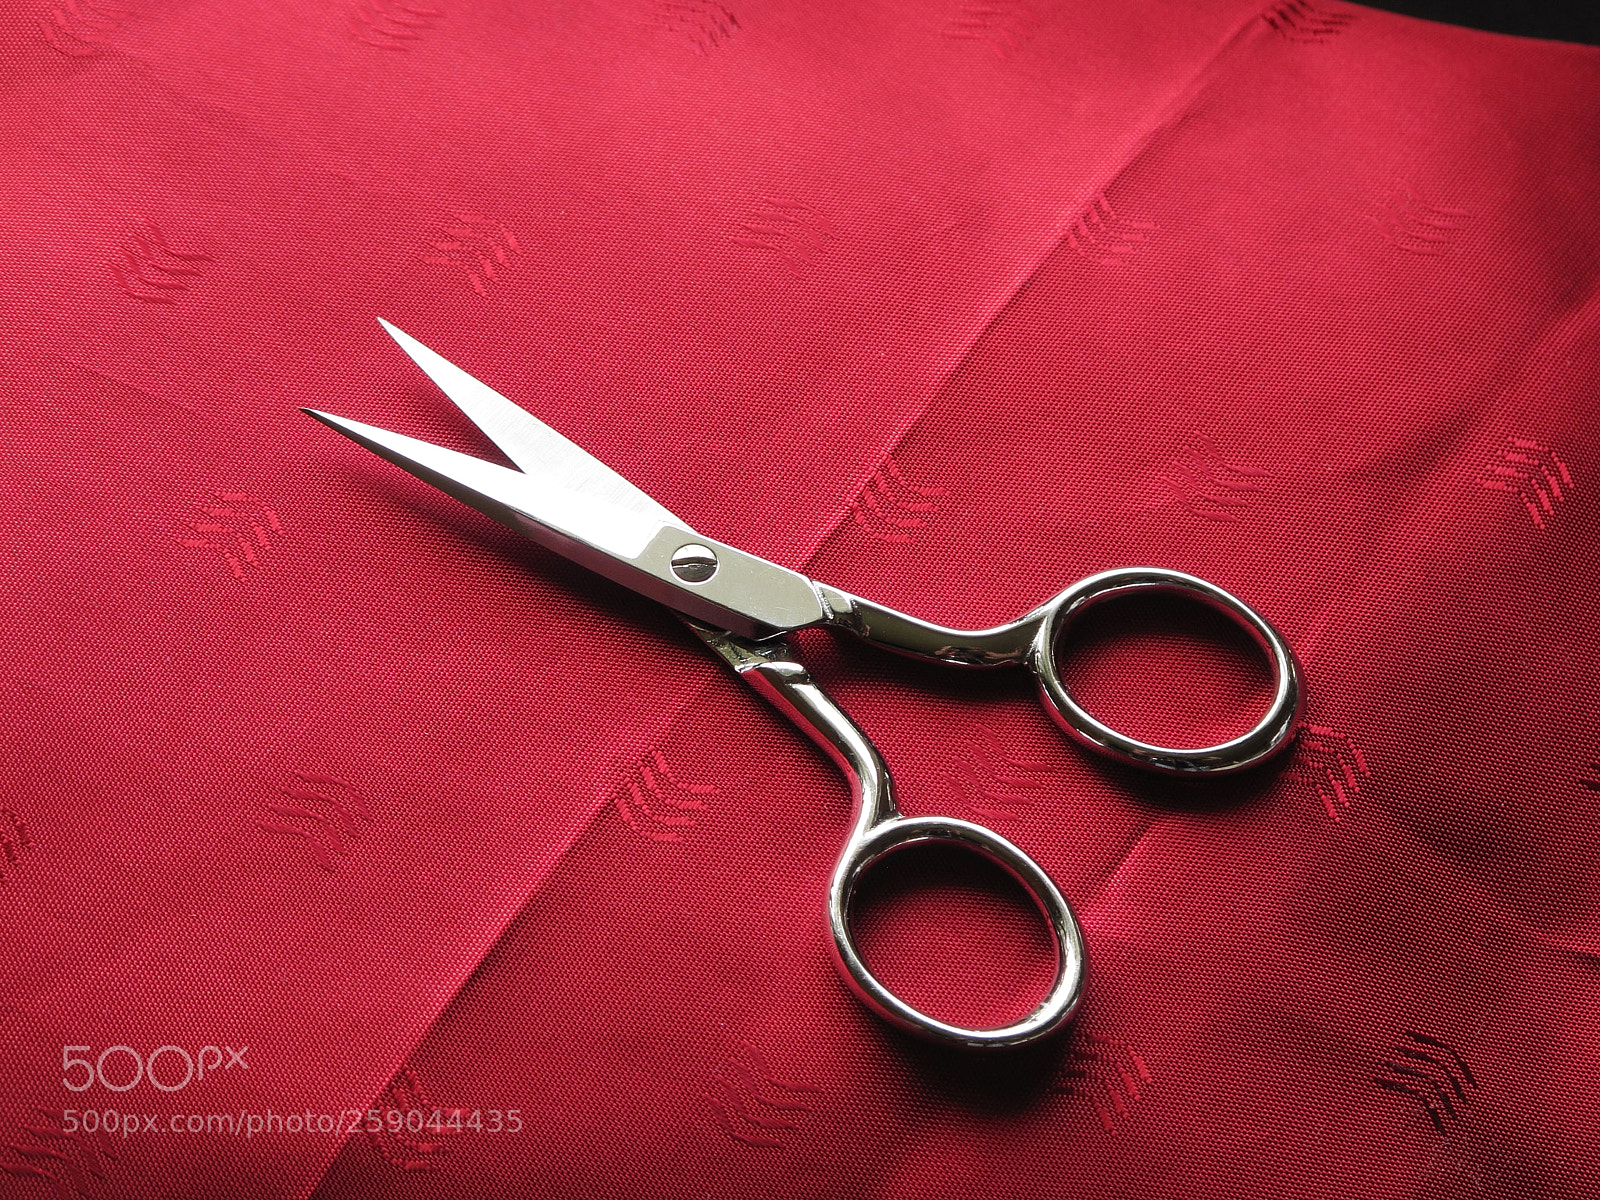 Canon PowerShot G12 sample photo. Embroidery scissors with red photography